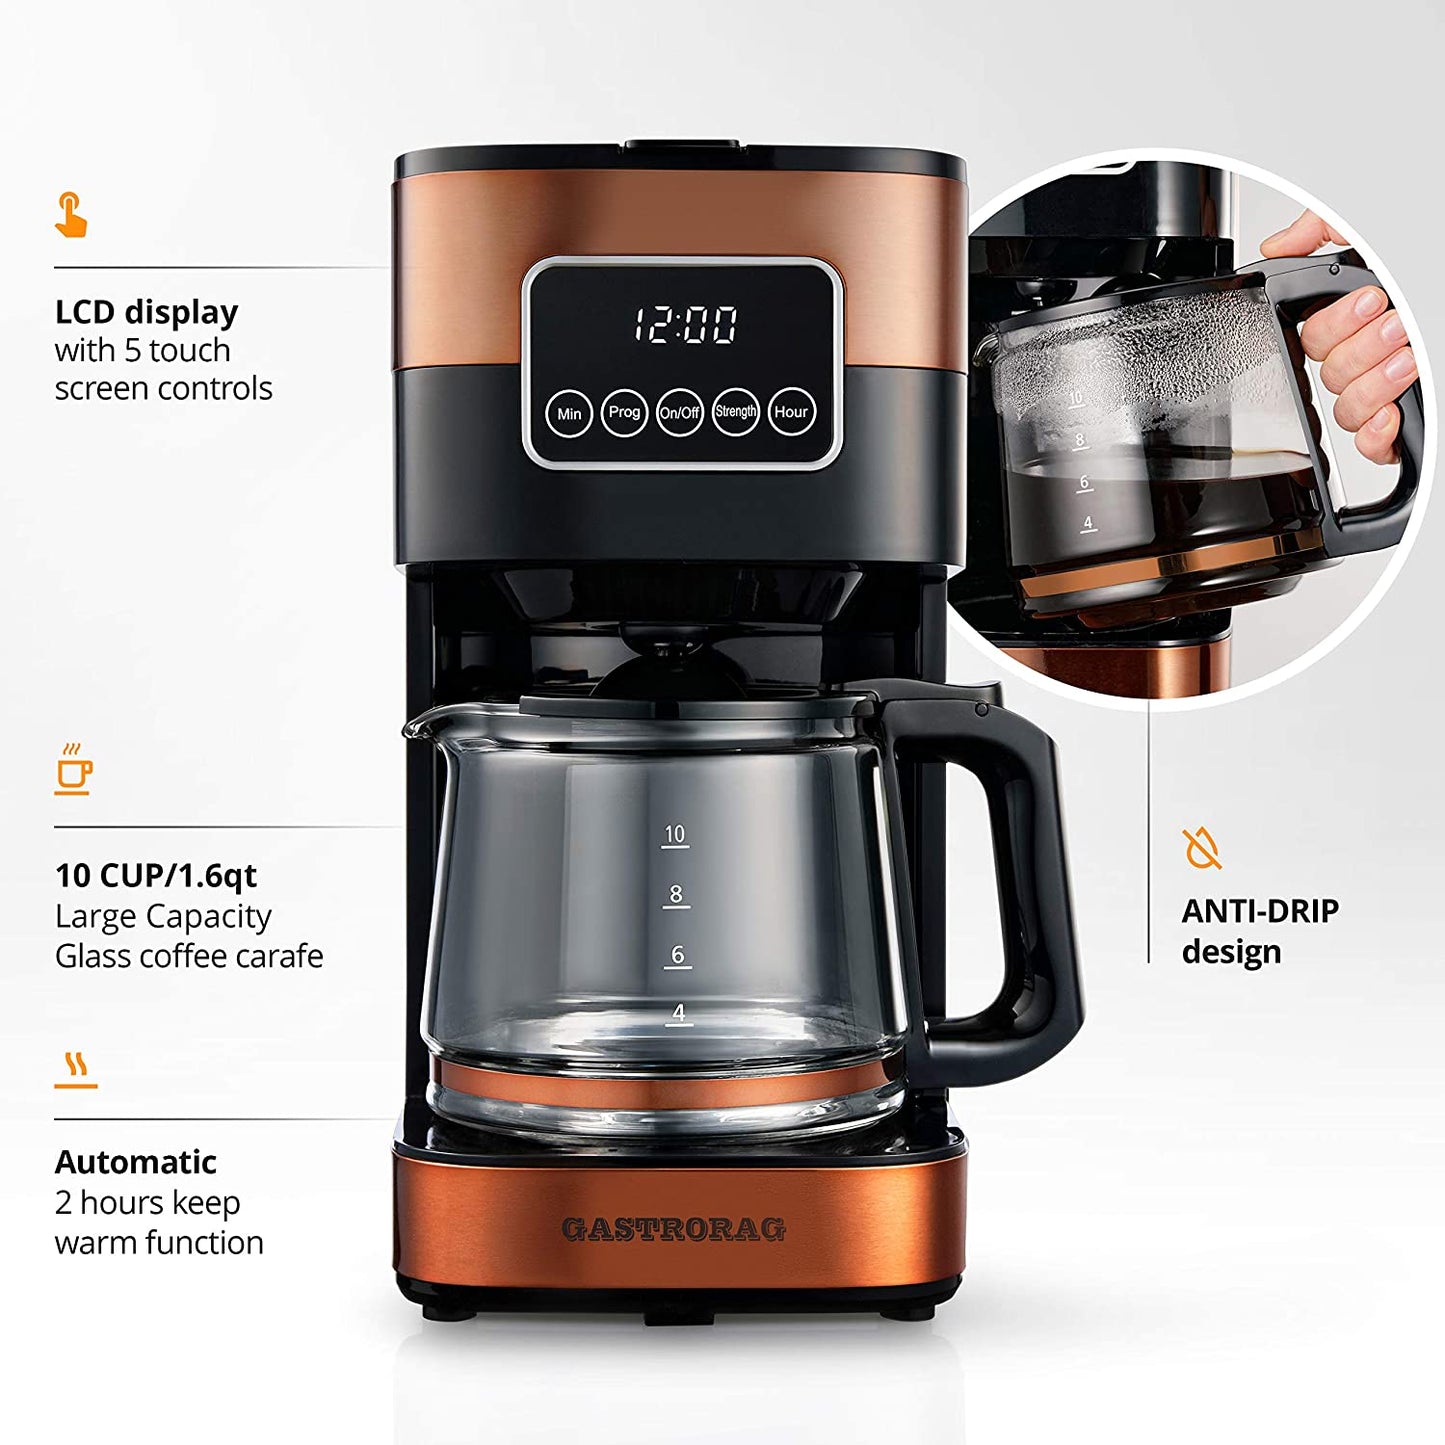 Gastrorag 10-Cup Drip Coffee Maker - Programmable Machine with Copper